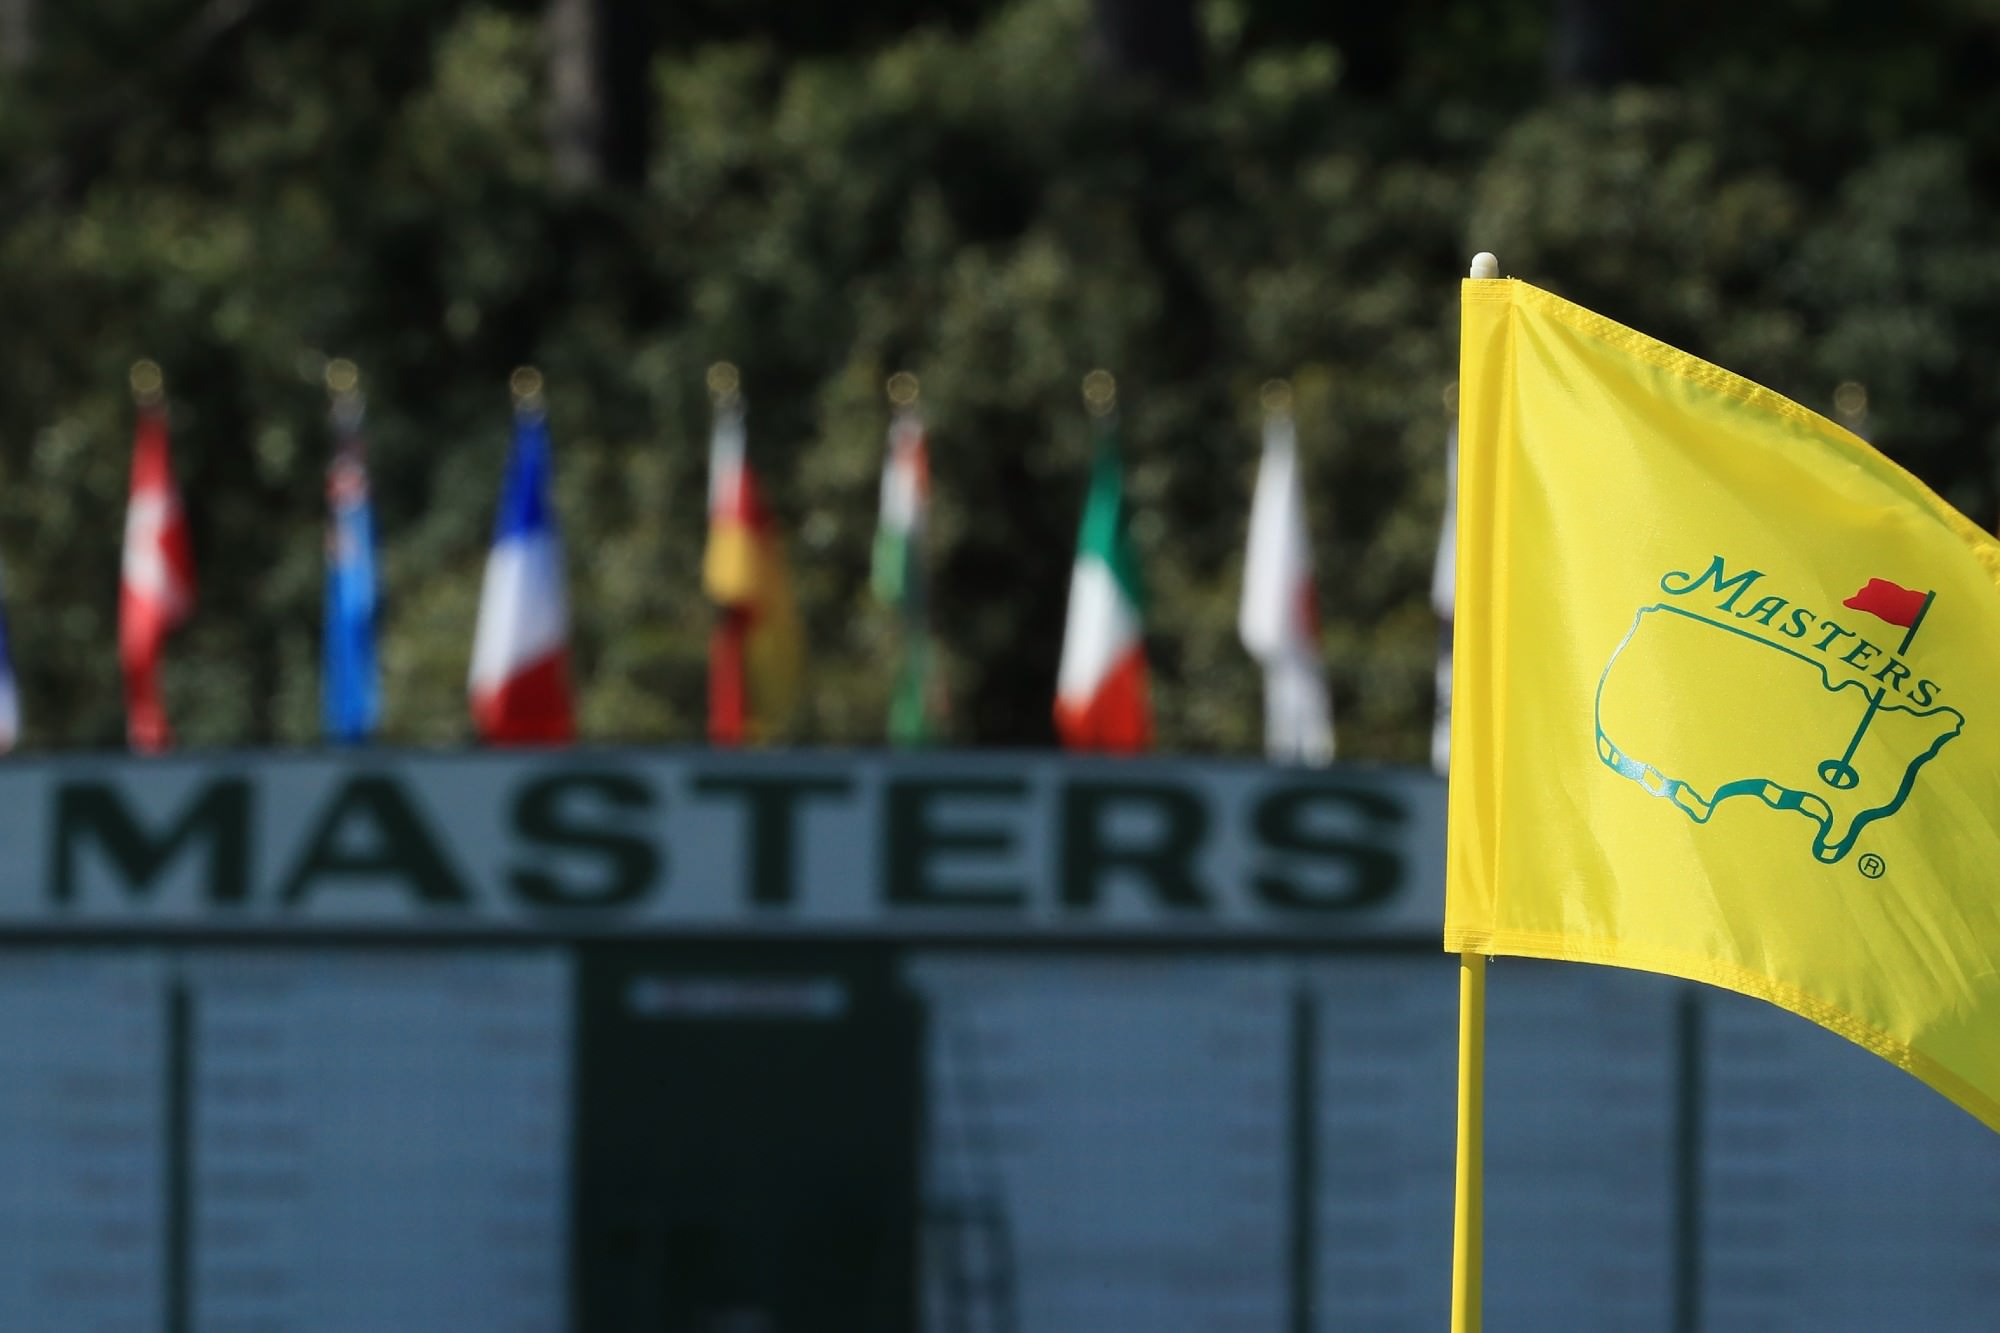 Prize money at the Masters